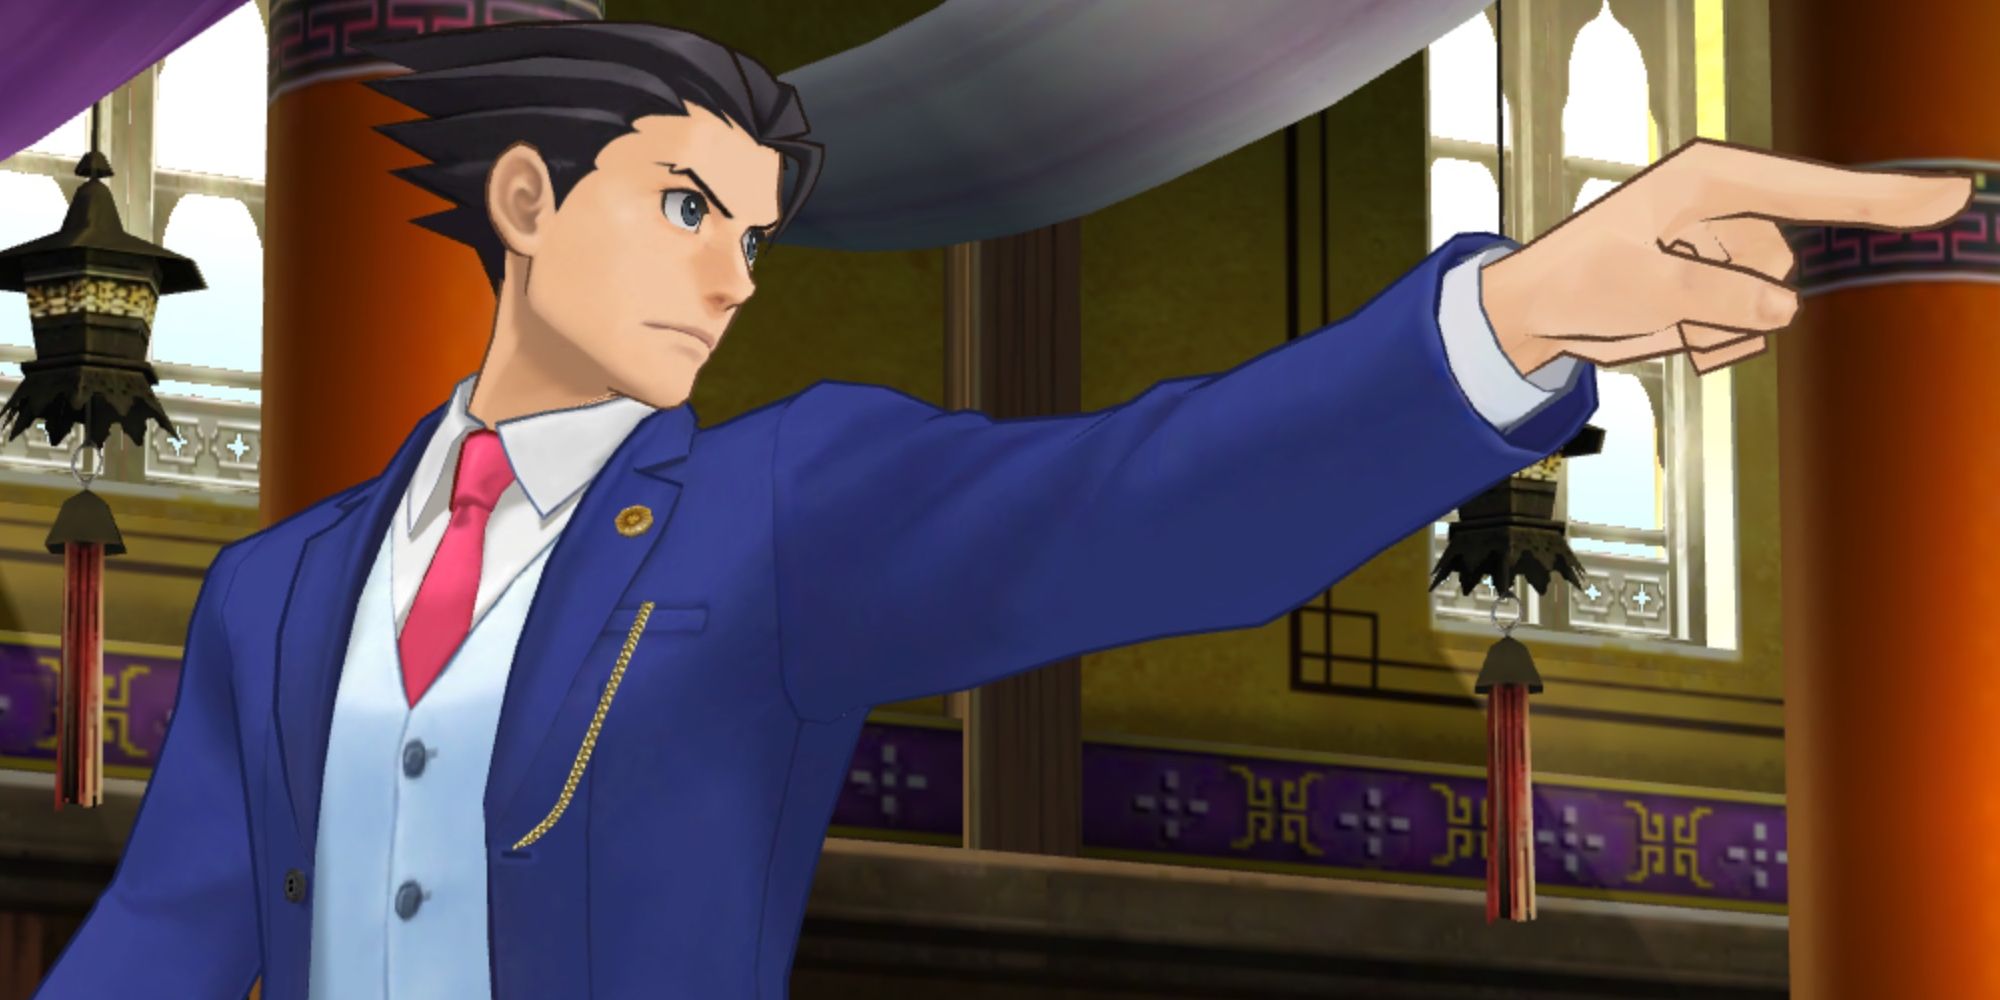 Phoenix Wright pointing after declaring an Objection